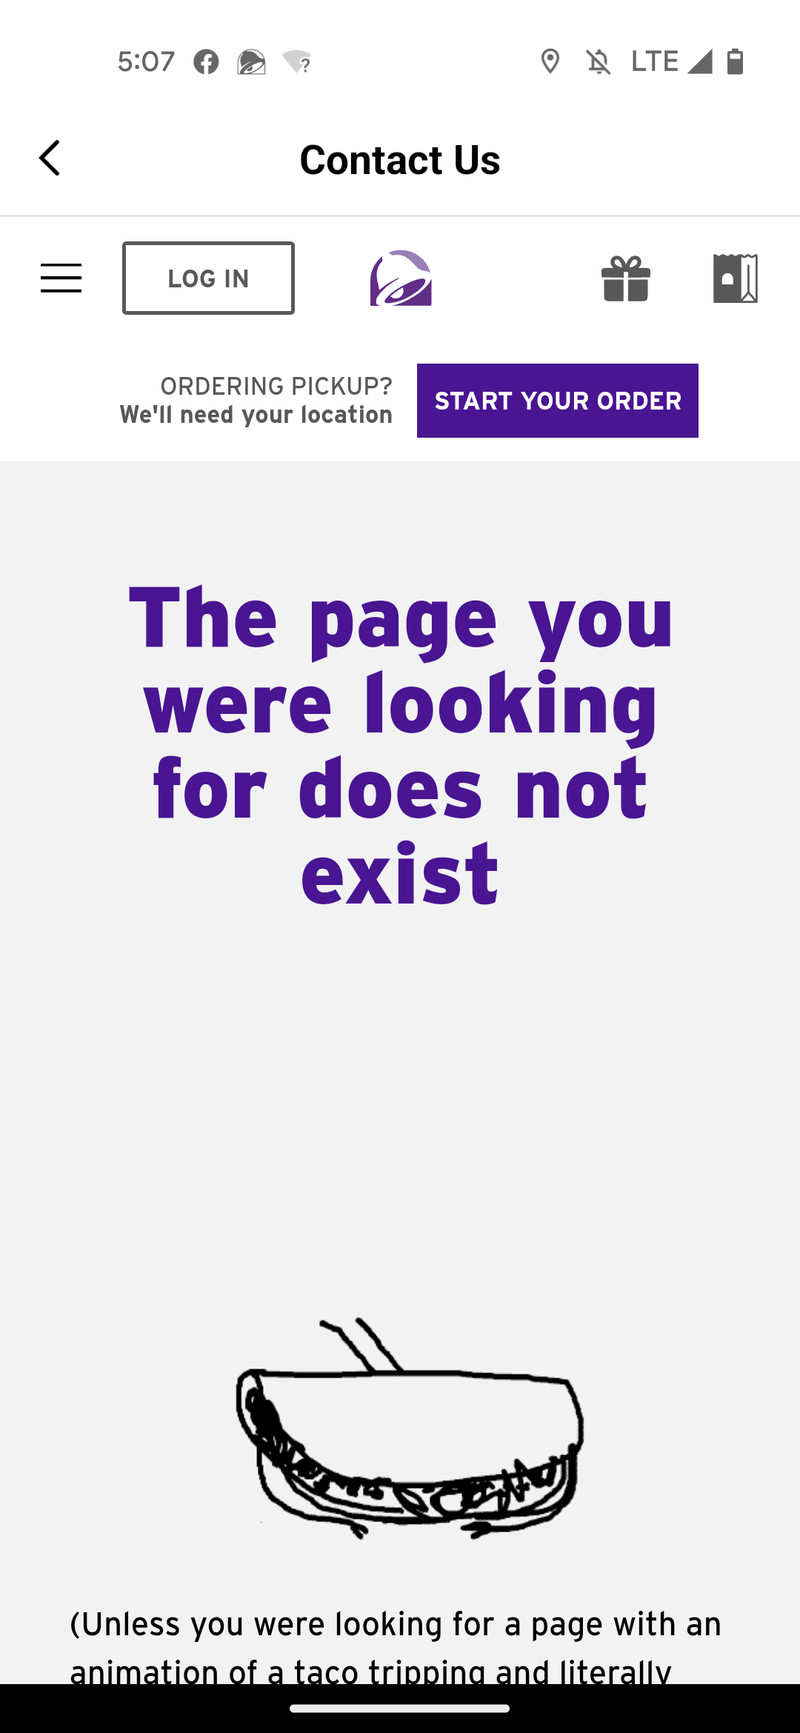 “The page you are looking for does not exist” message on the app.